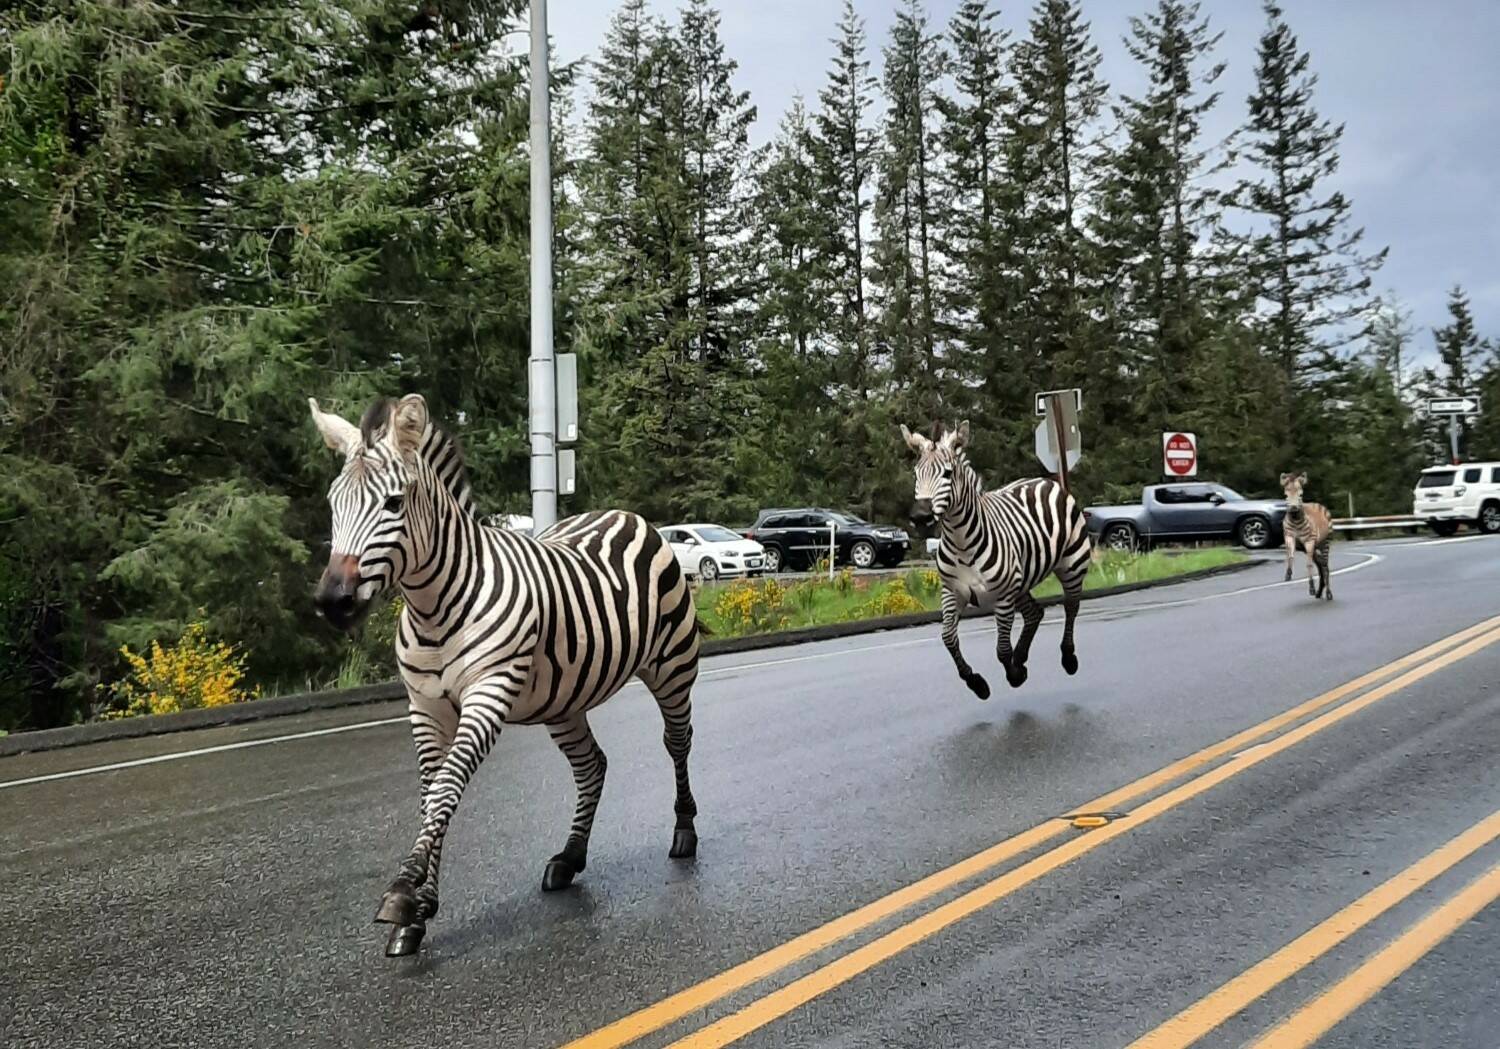 Zebras on the loose April 28 in North Bend. (Photo courtesy of Paul Luccio)